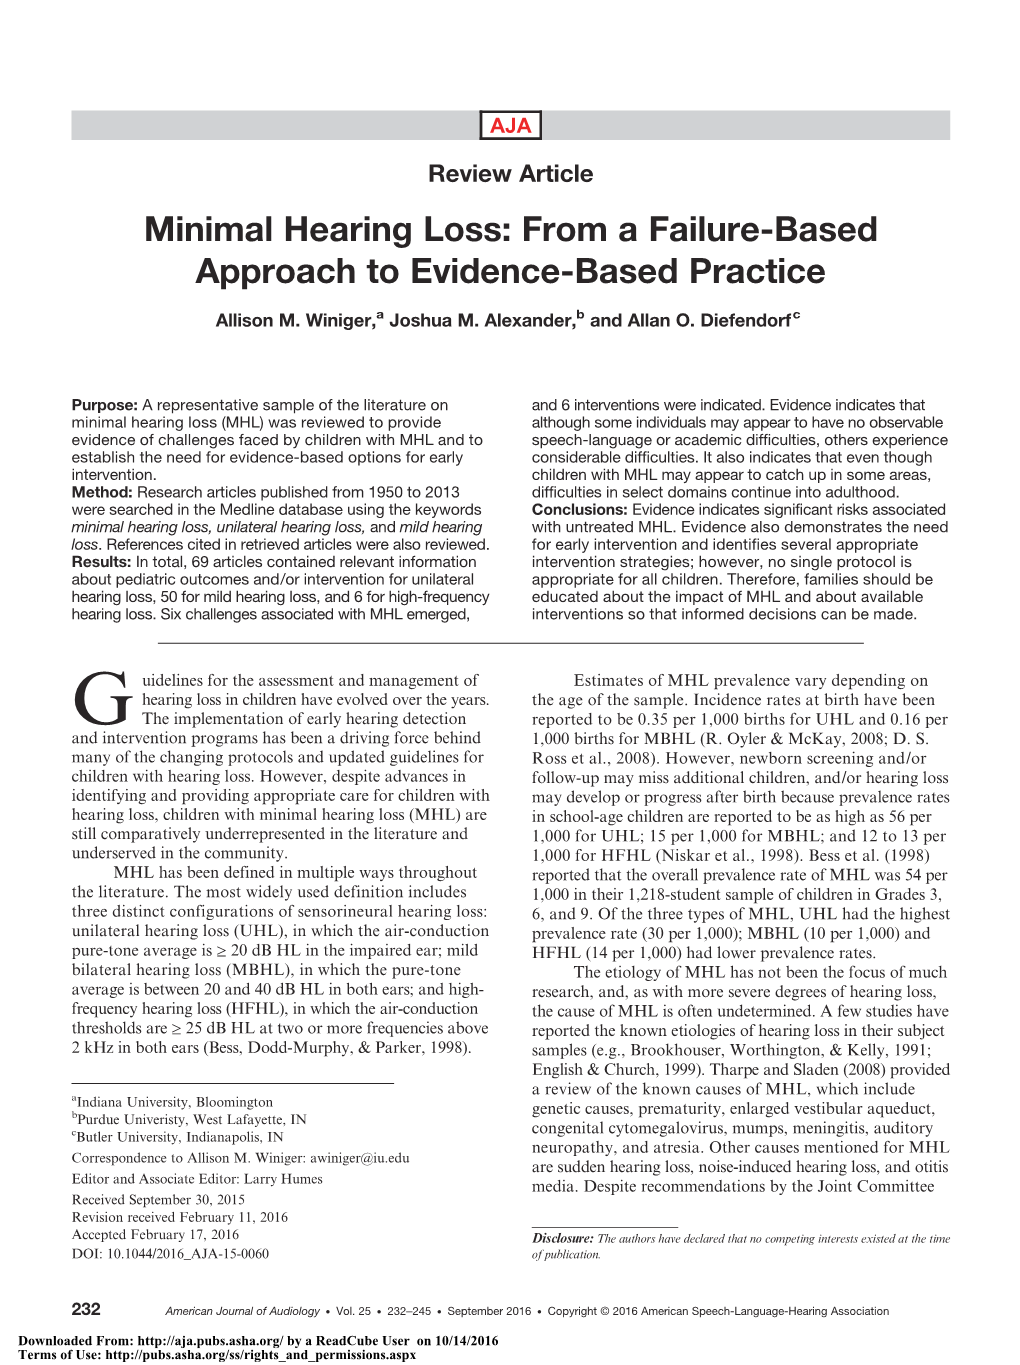 Minimal Hearing Loss: from a Failure-Based Approach to Evidence-Based Practice